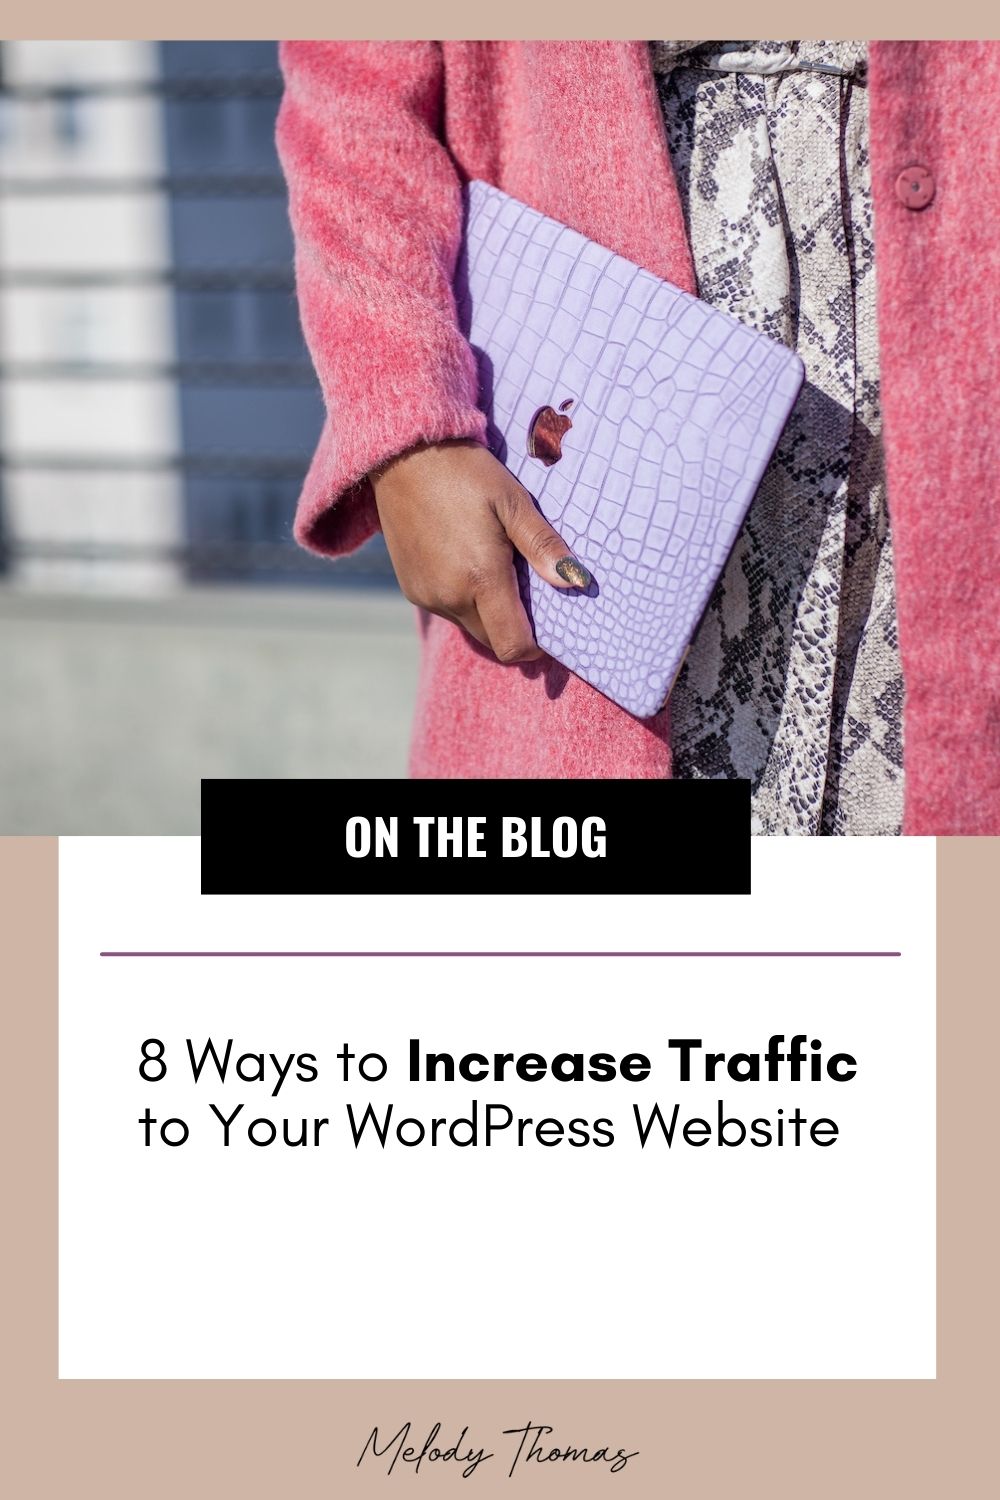 8 Ways to Increase Traffic to Your WordPress Website